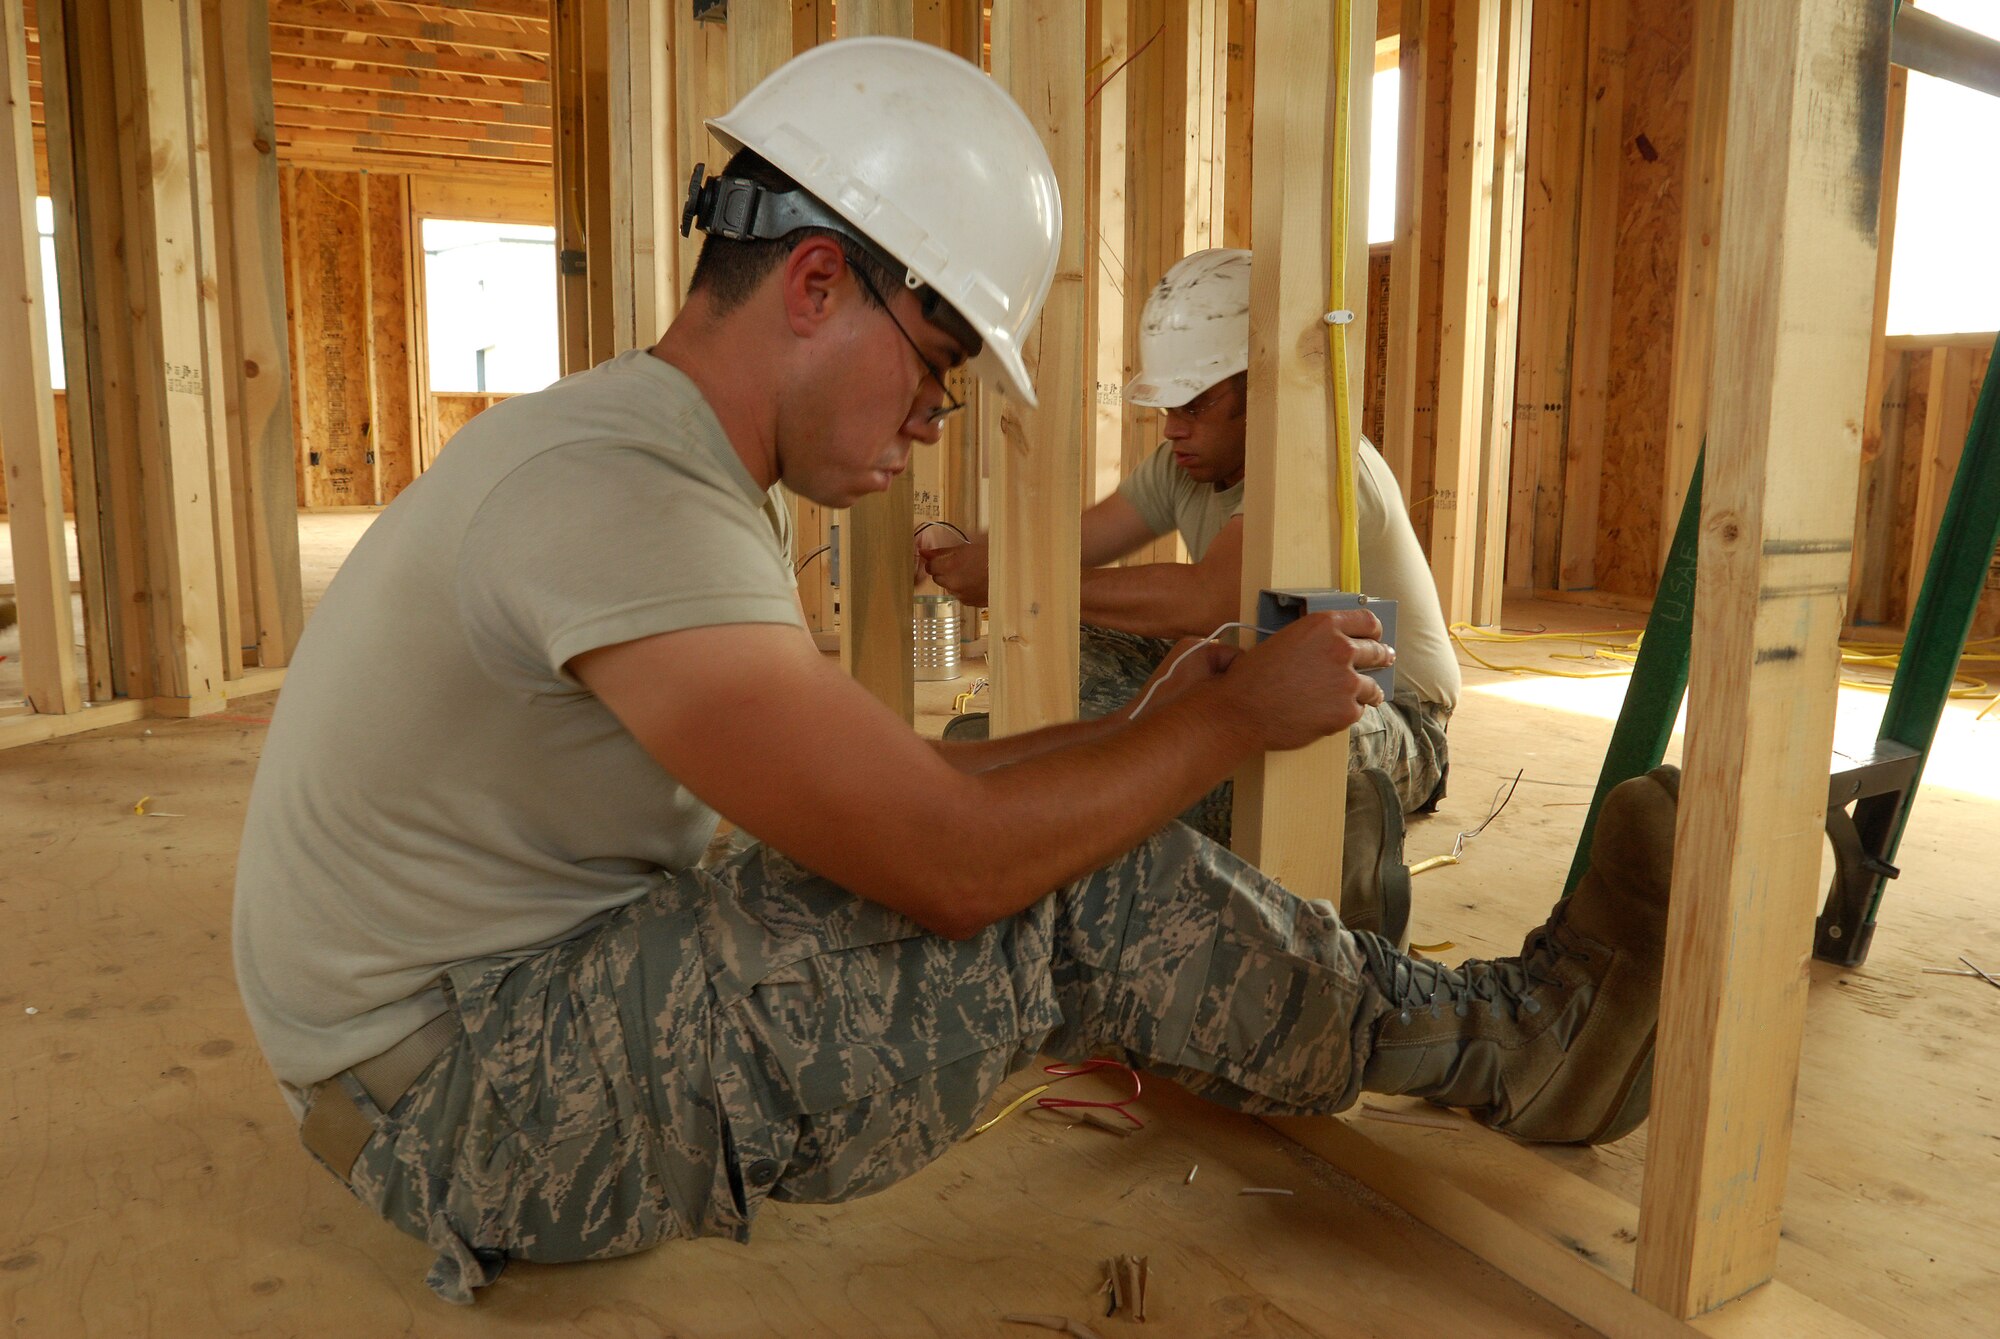 Members of the 433rd Civil Engineering Squadron conduct a humanitarian mission in the Red Lake Indian Reservation for the Red Lake band of Chippewa Indians, just outside of Bemidji, Minnesota. Senior Airman Jaime Payen and Staff Sgt. David Bustos wire boxes which will hold electrical outlets in what will be two separate bedrooms.(U.S. Air Force photo/Airman 1st Class Brian McGloin)